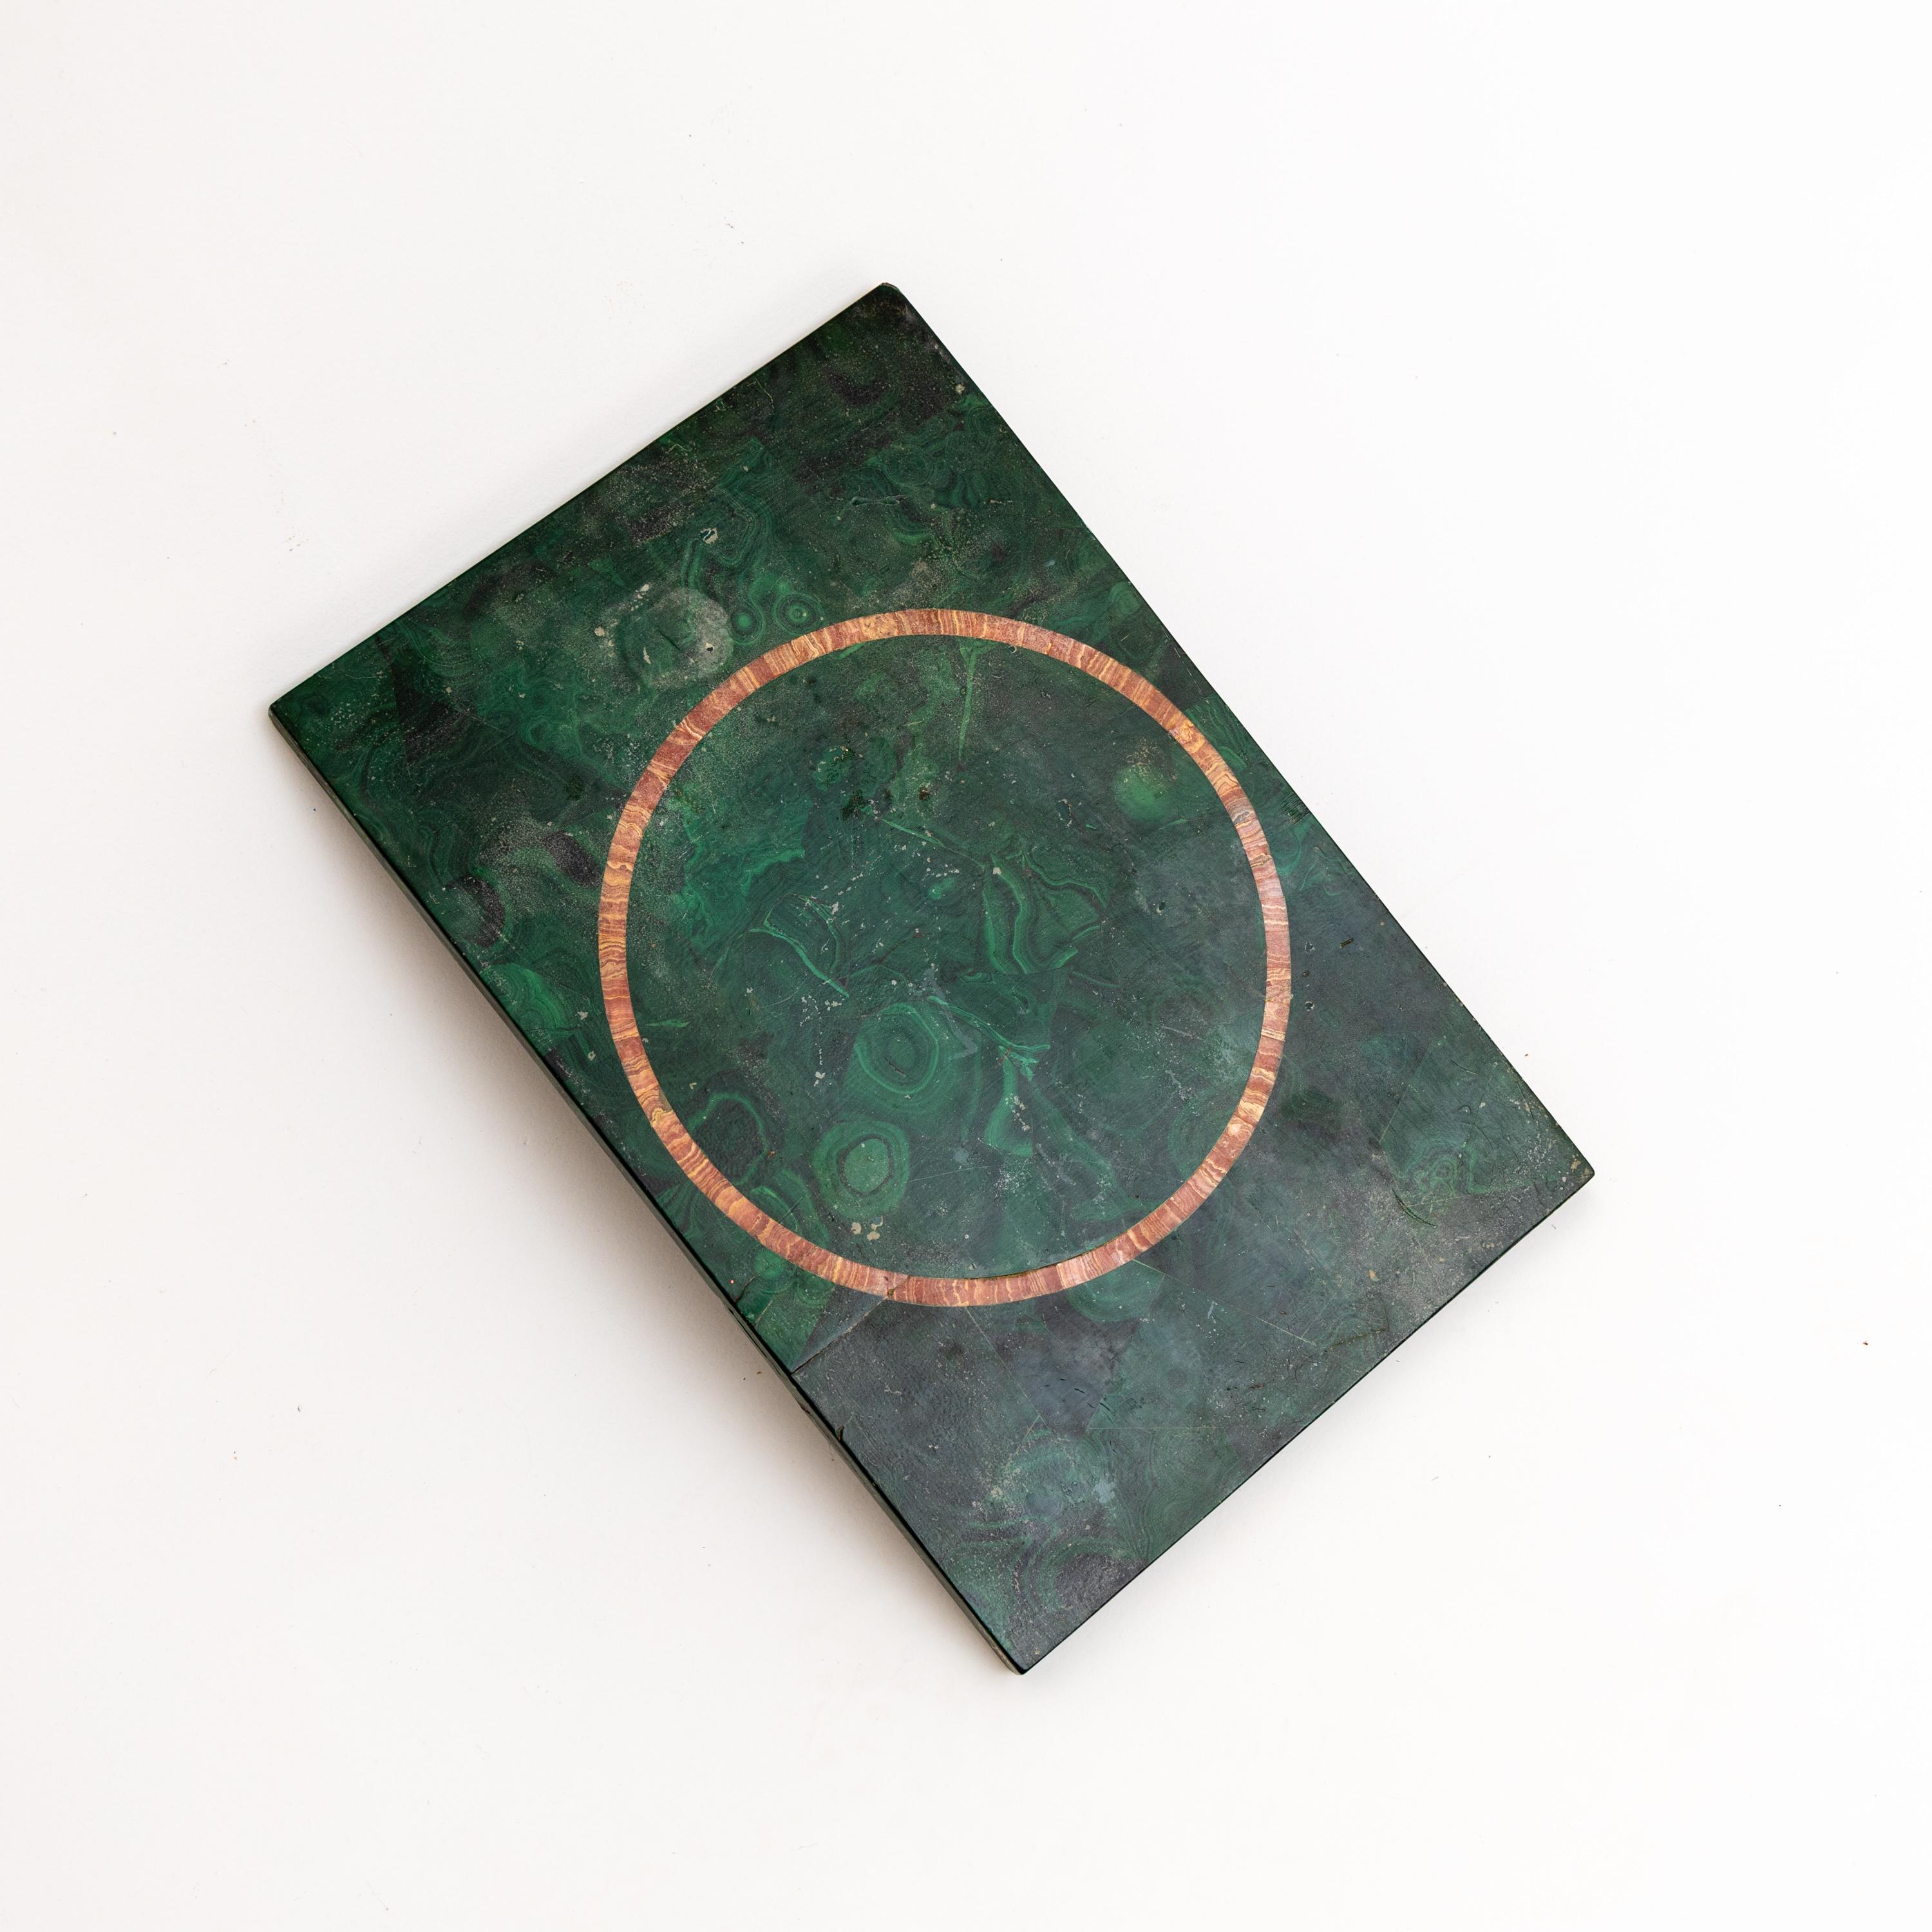 Malachite veneered onto a rectangular stone slab with a ring-shaped inlay of agate. Breakage, old restored.